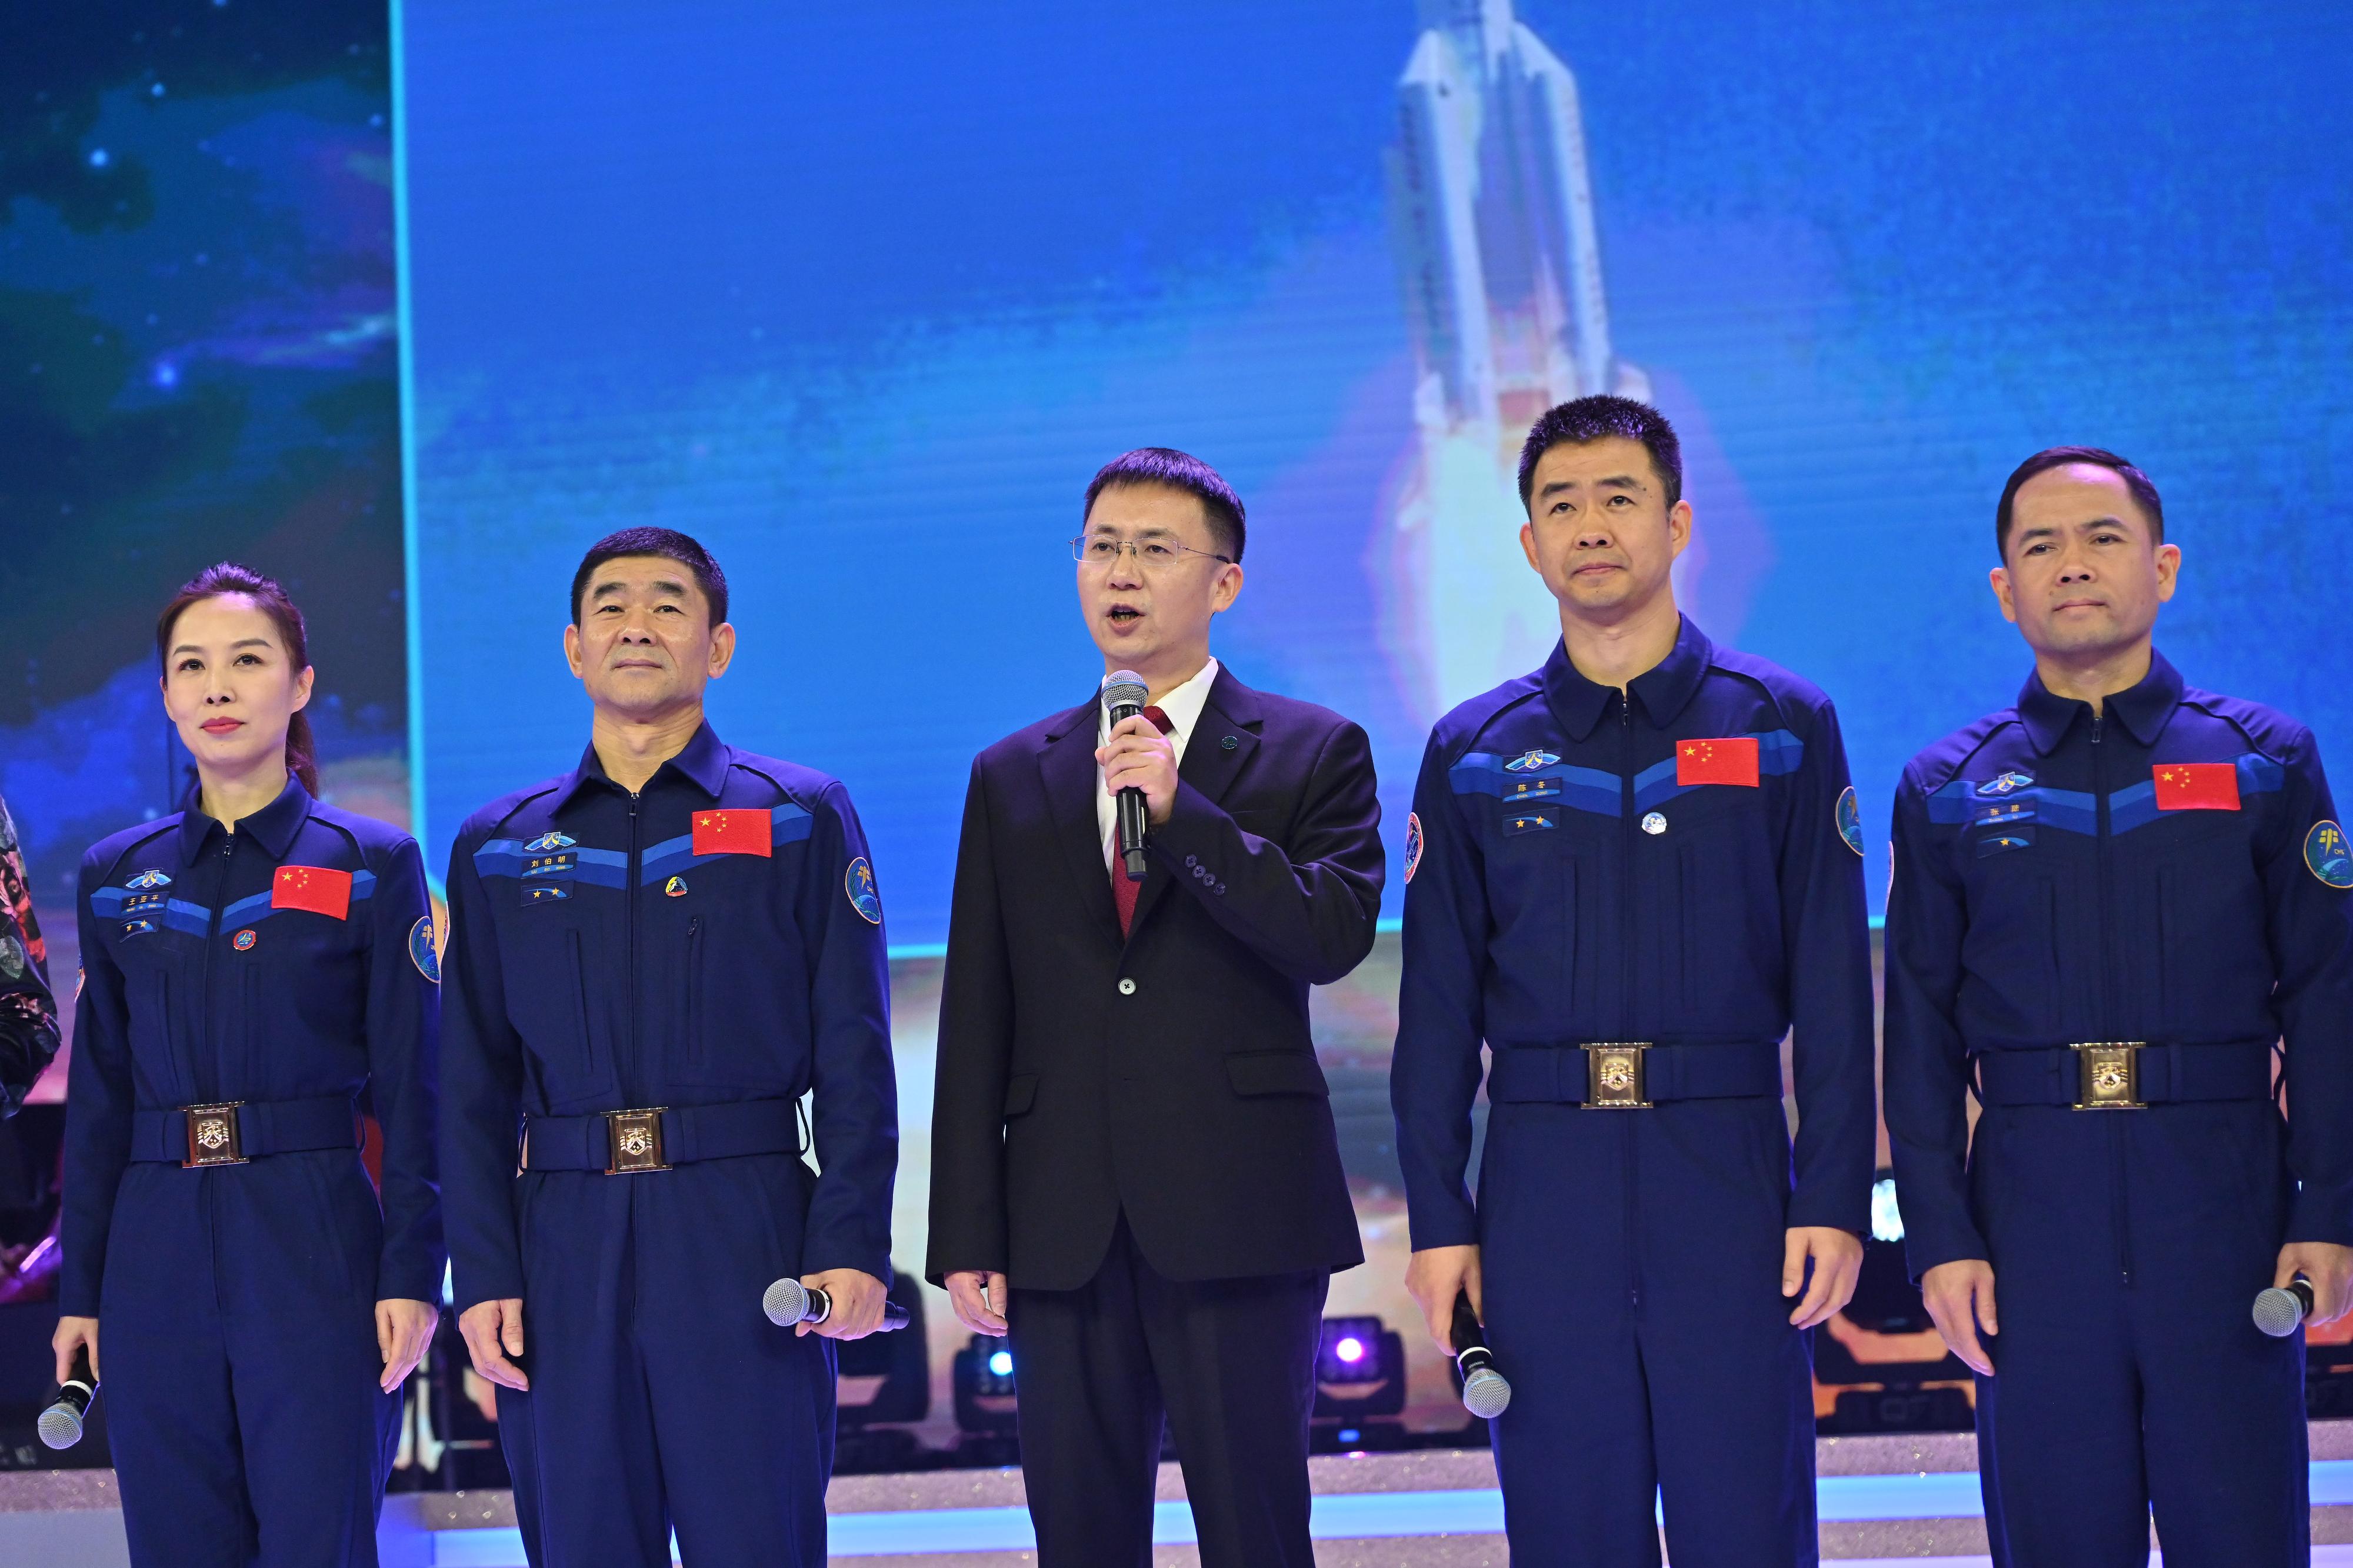 The China Manned Space delegation continued their visit to Hong Kong today (November 29) and attended the variety show that marked Hong Kong's welcoming of the China Manned Space delegation at the Hong Kong Coliseum. Photo shows (from left) Shenzhou-13 astronaut Ms Wang Yaping; Shenzhou-12 astronaut Mr Liu Boming; the leader of the delegation and Deputy Director General of the China Manned Space Agency, Mr Lin Xiqiang; Shenzhou-14 mission commander Mr Chen Dong; and Shenzhou-15 astronaut Mr Zhang Lu, meeting with audiences.